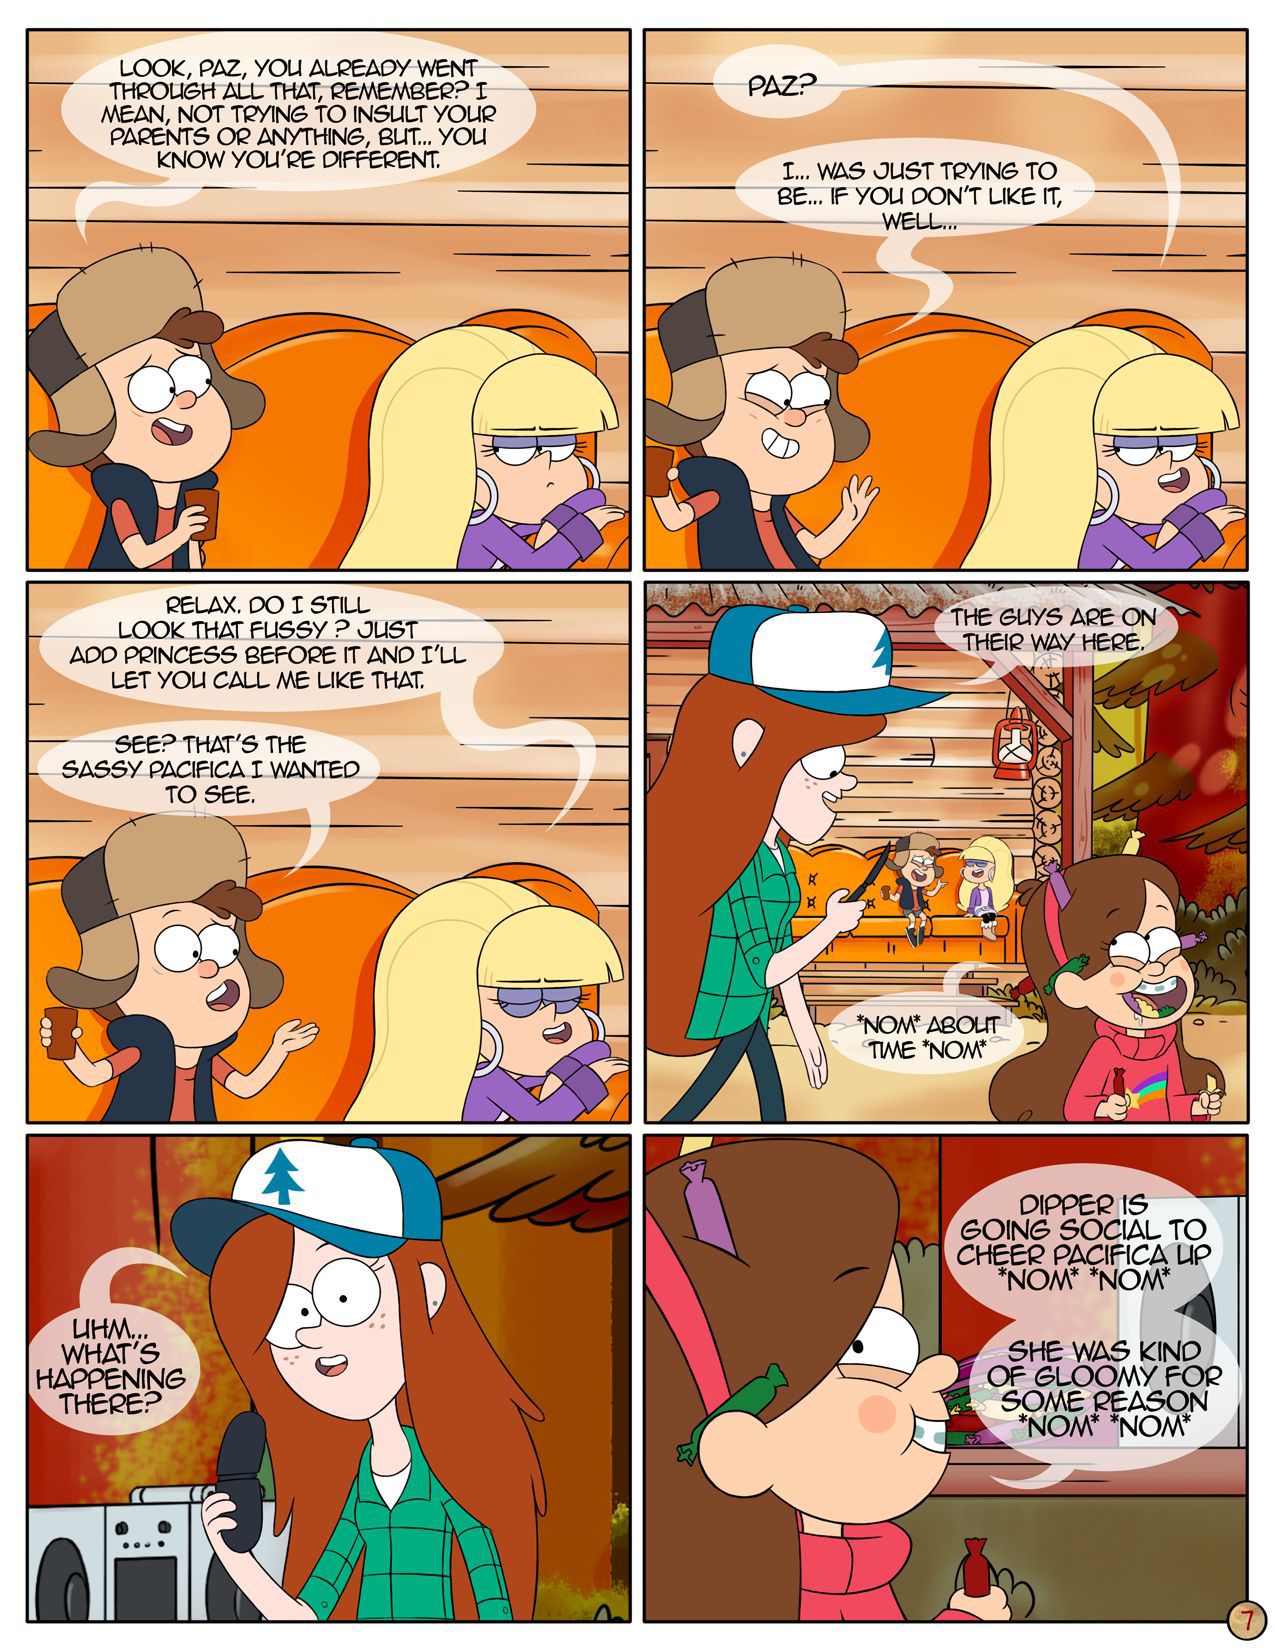 [Area] Next Summer (Gravity Falls) [Ongoing] 8